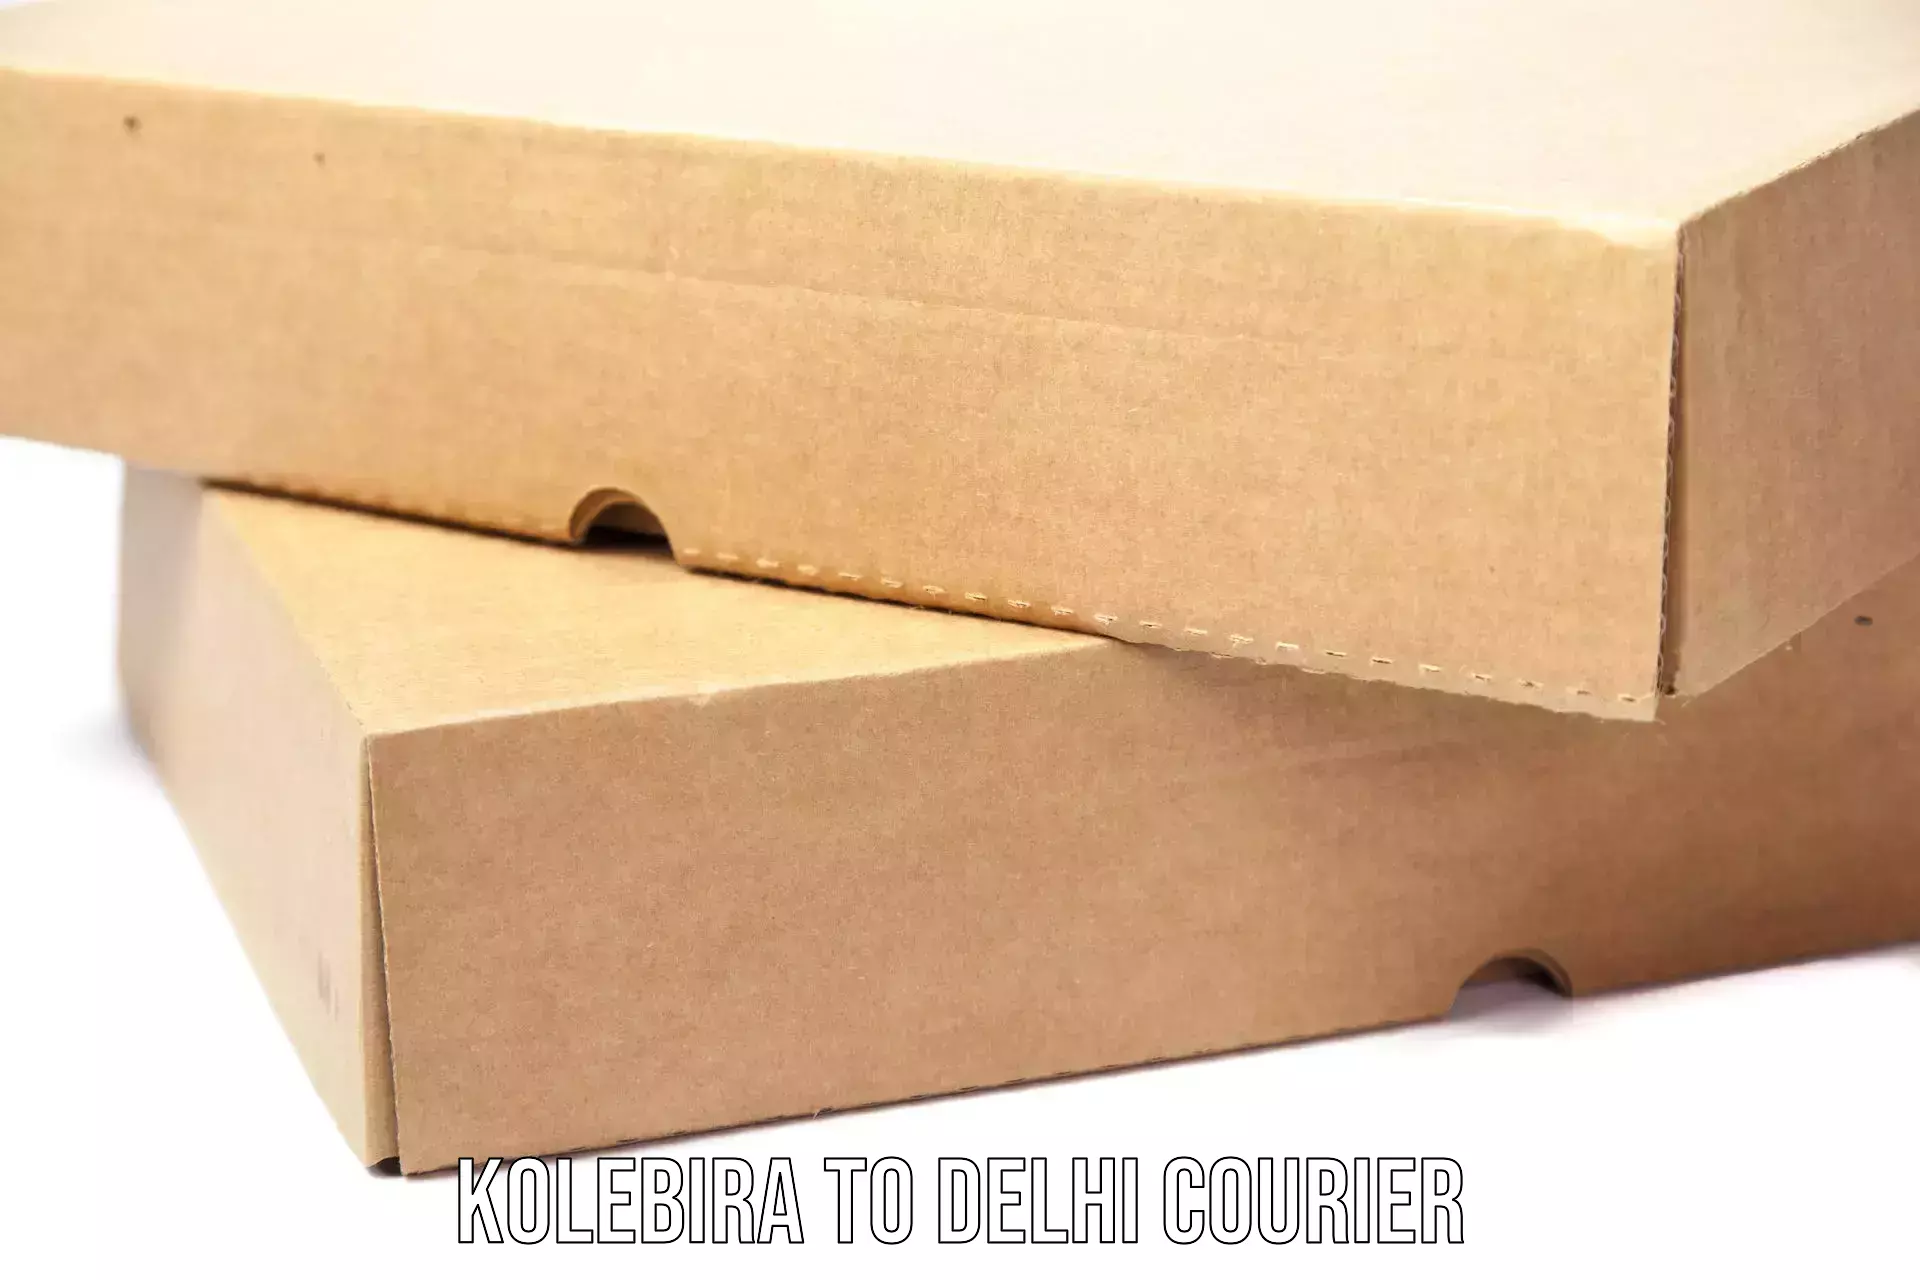 Local courier options in Kolebira to NCR